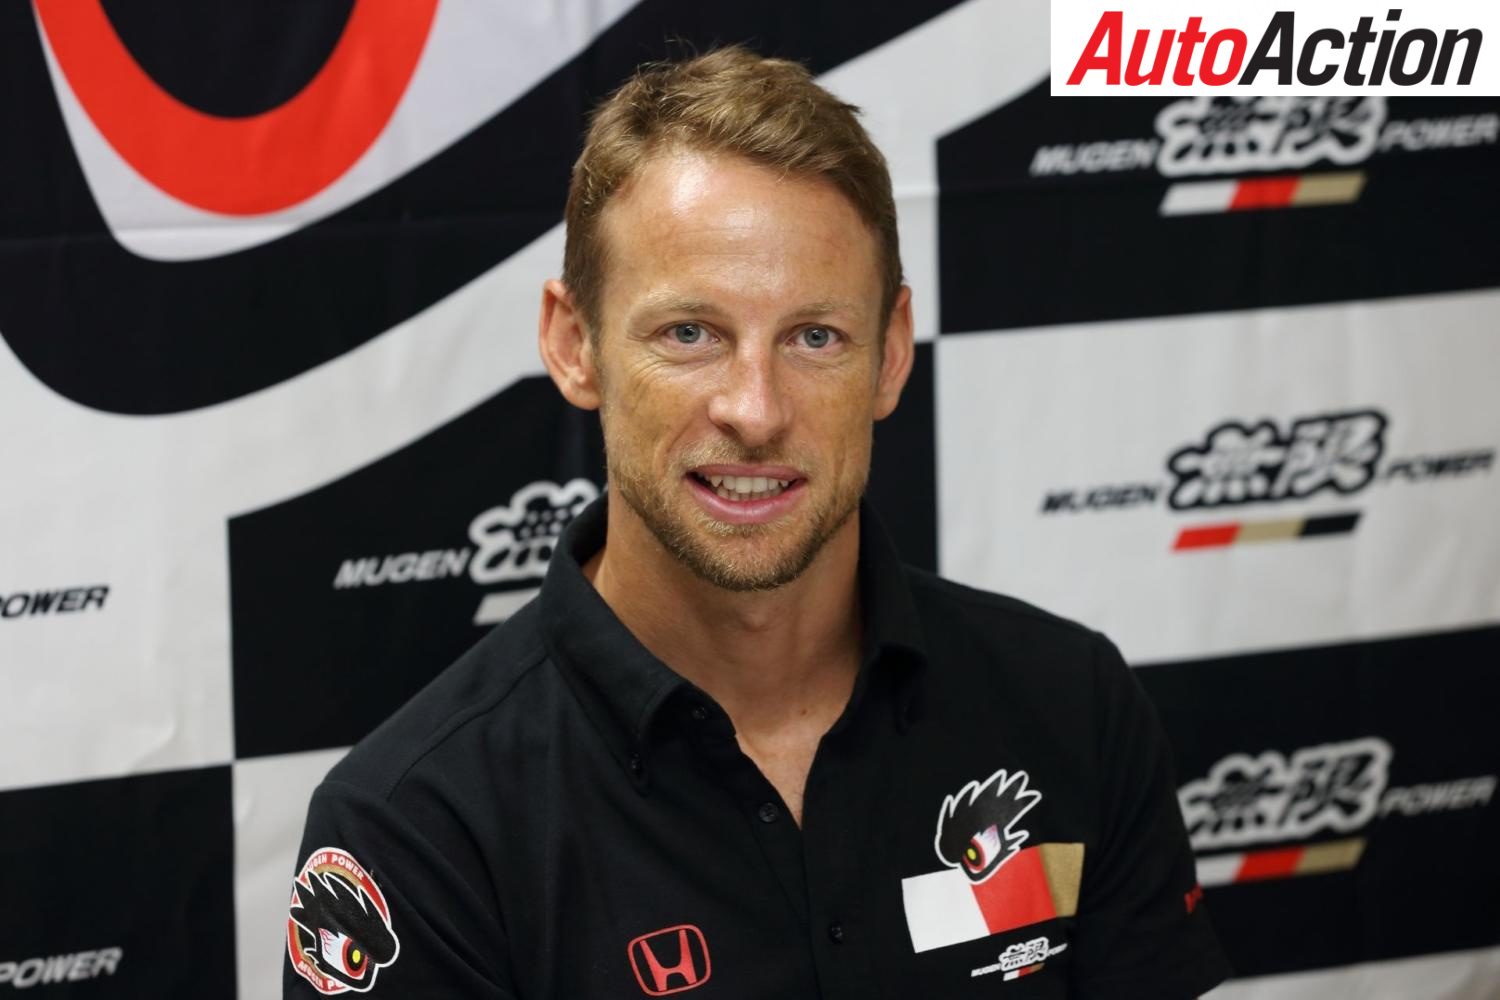 Jenson Button will resume his racing career in Super GT - Photo: LAT